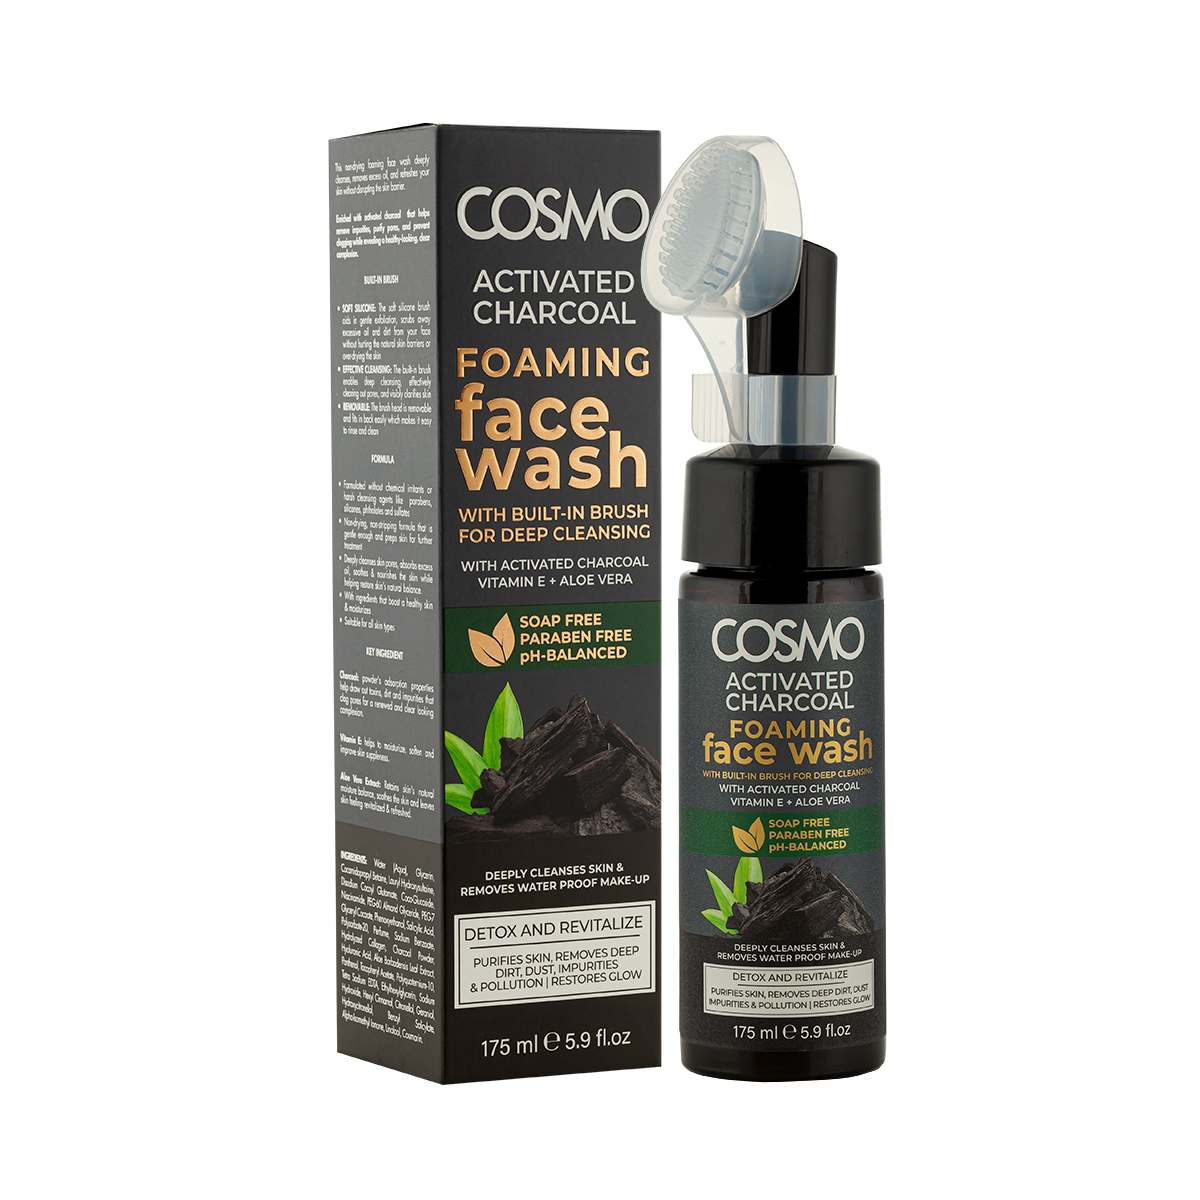 ACTIVATED CHARCOAL FOAMING FACE WASH - 175ML